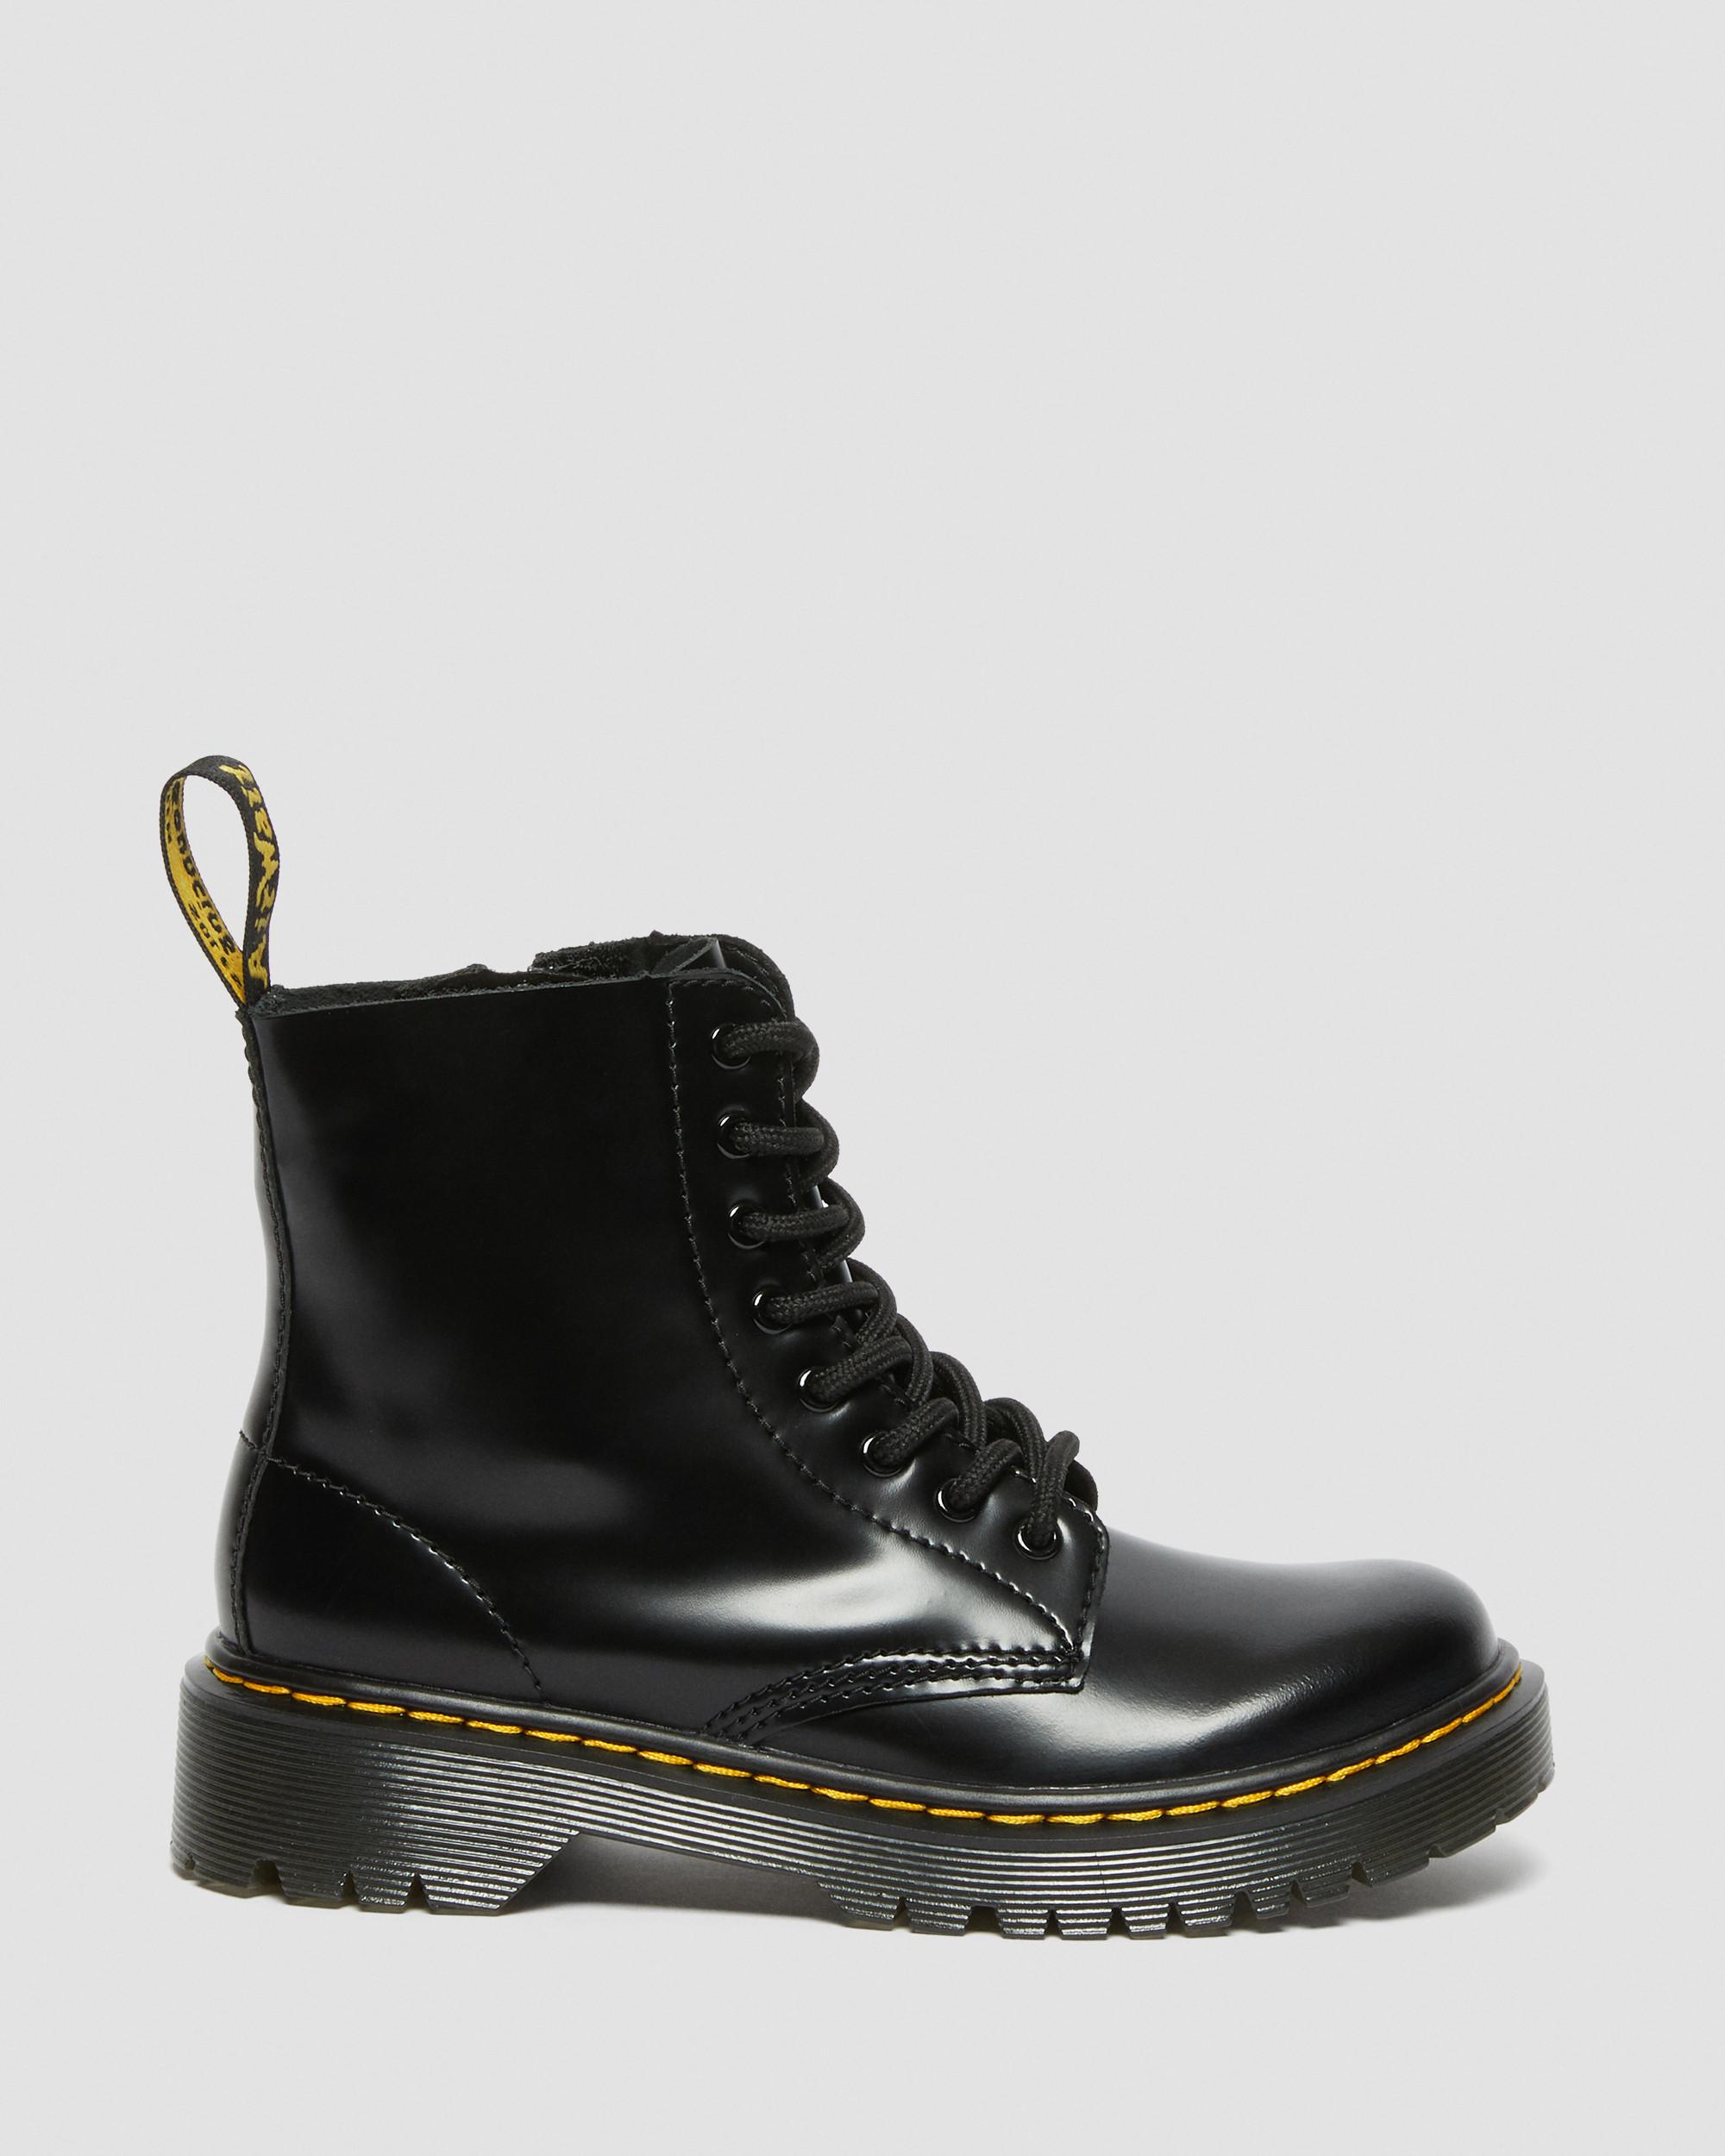 Junior 1460 Pascal Bex Leather Lace Up Boots in Black | Dr. Martens